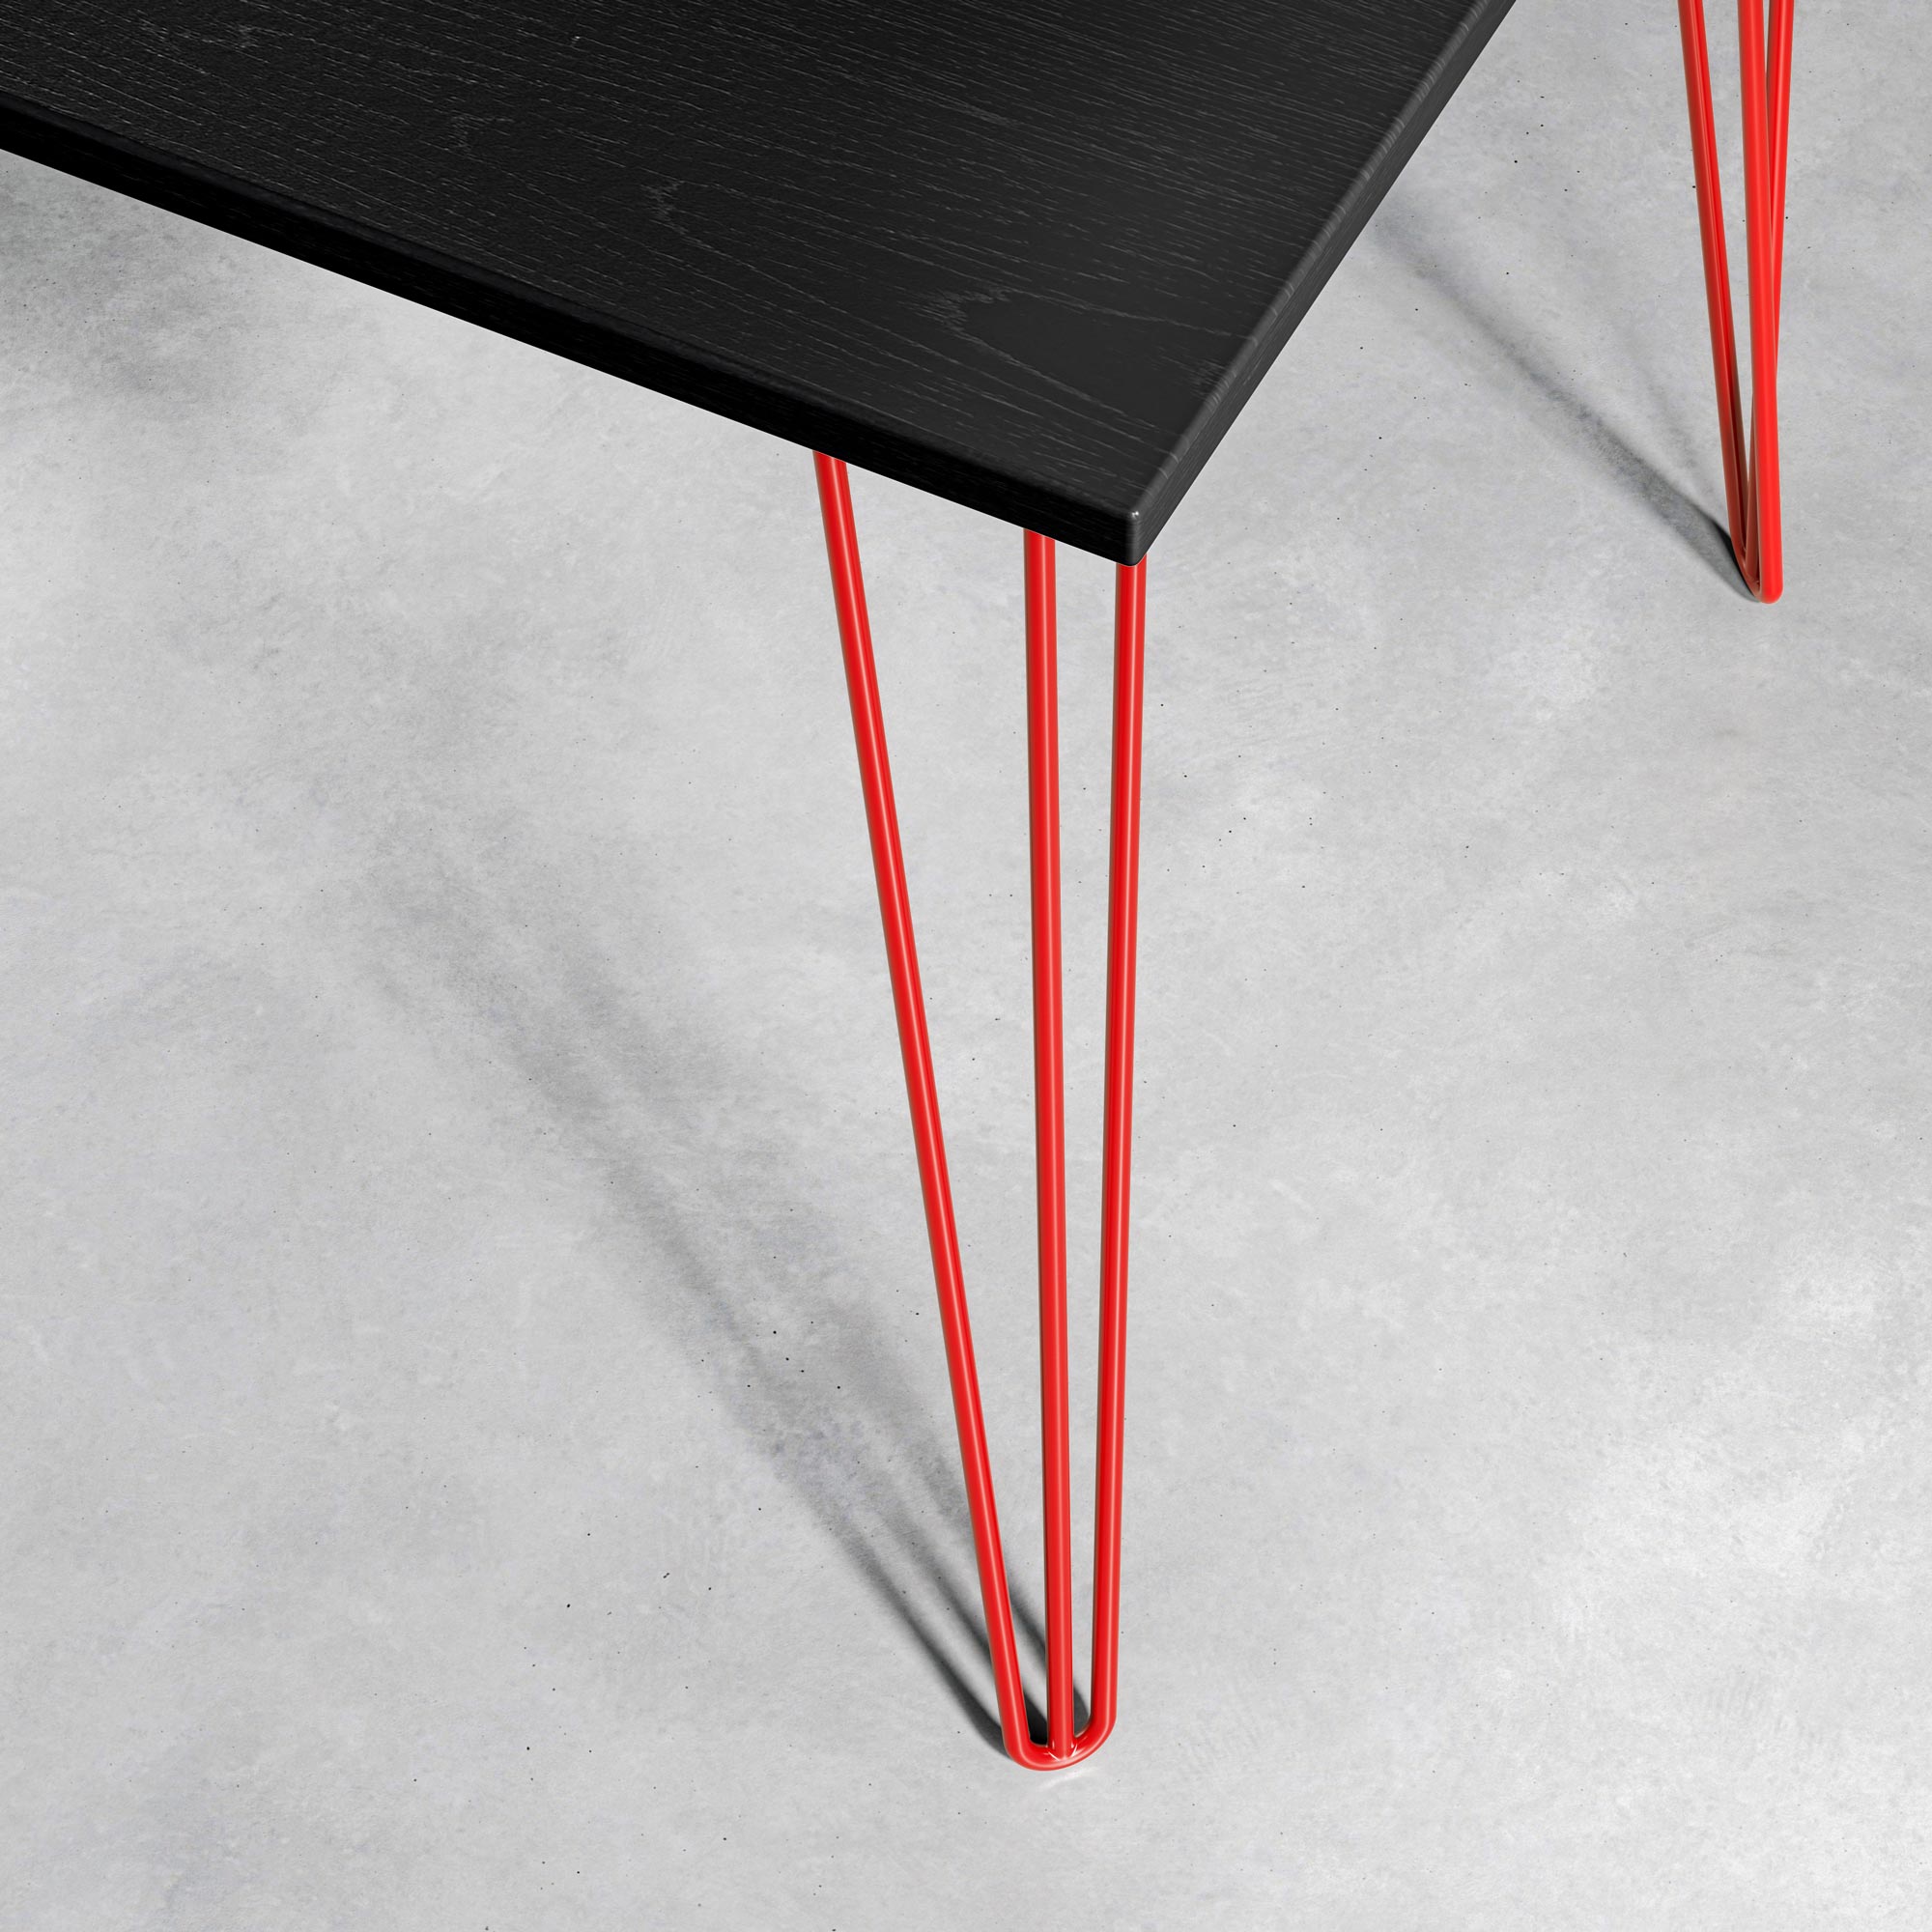 Black Ash Hairpin Table-Small (60cm x 120cm)-Red-The Hairpin Leg Co.